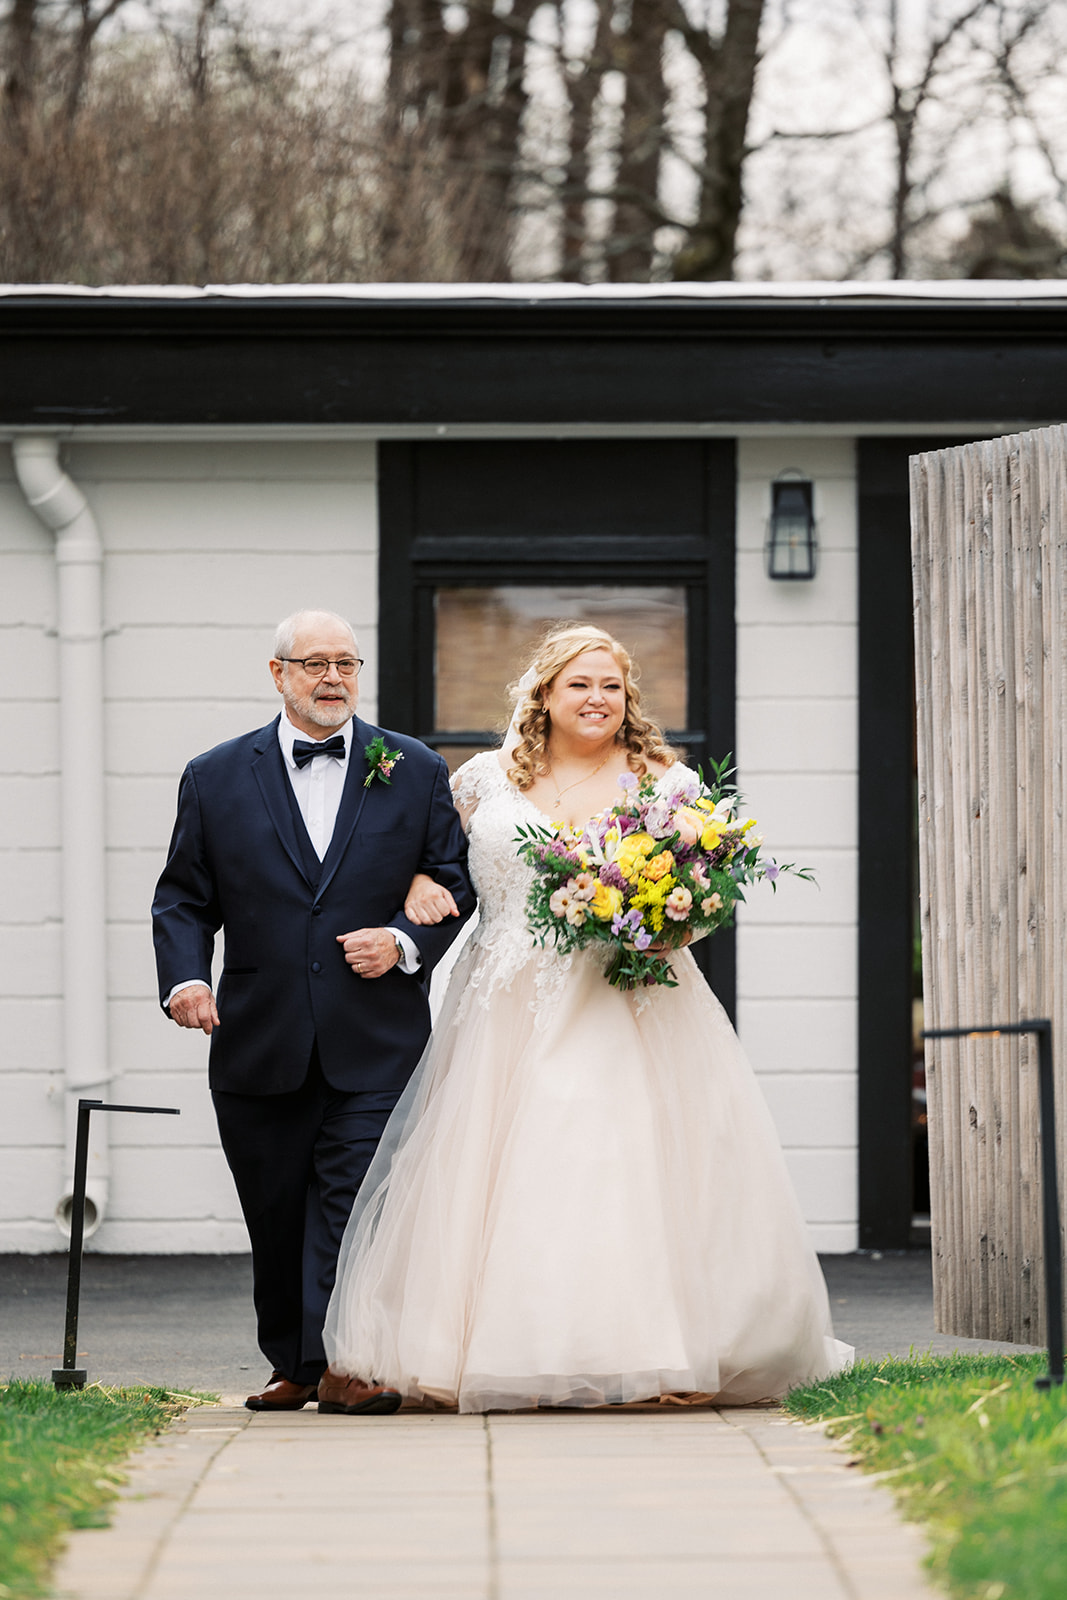 A father walks his bride down the aisle to her outdoor wedding ceremony